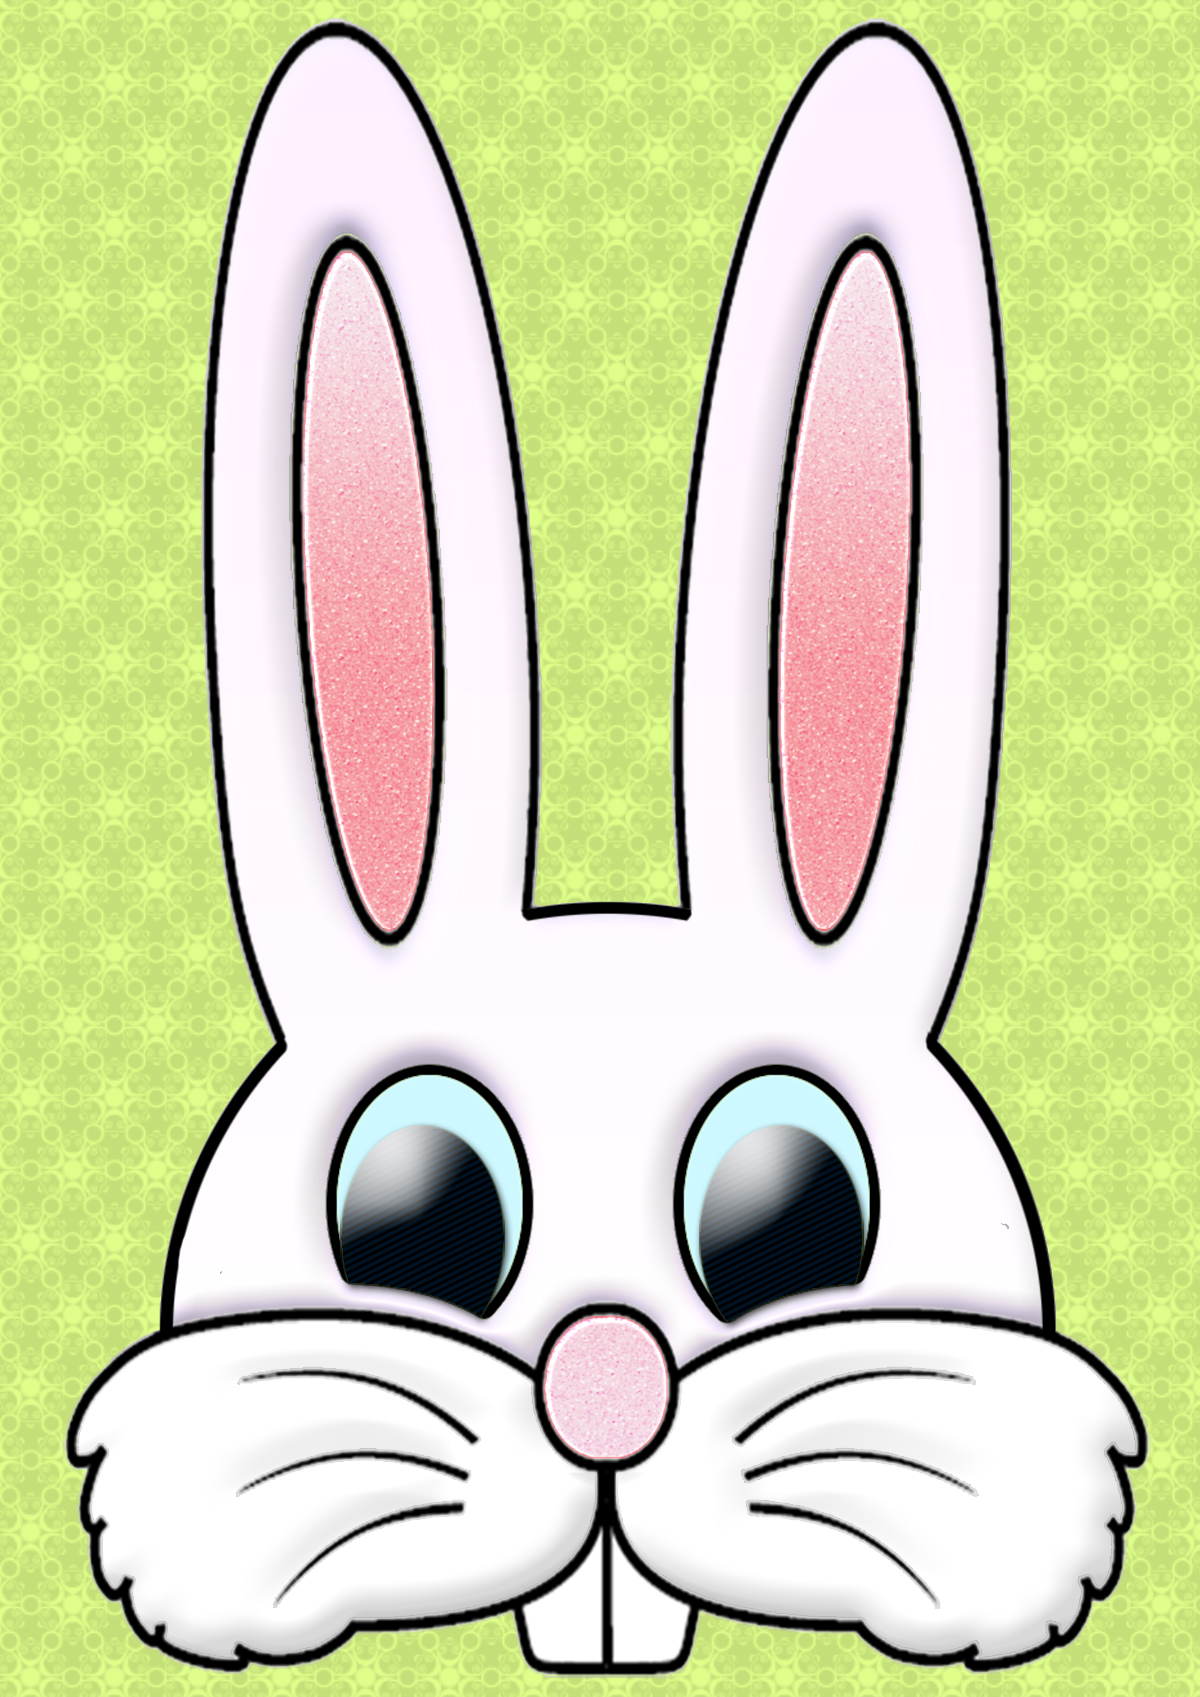 8 Best Images of Printable Easter Bunny Face - Easter Bunny Face ...